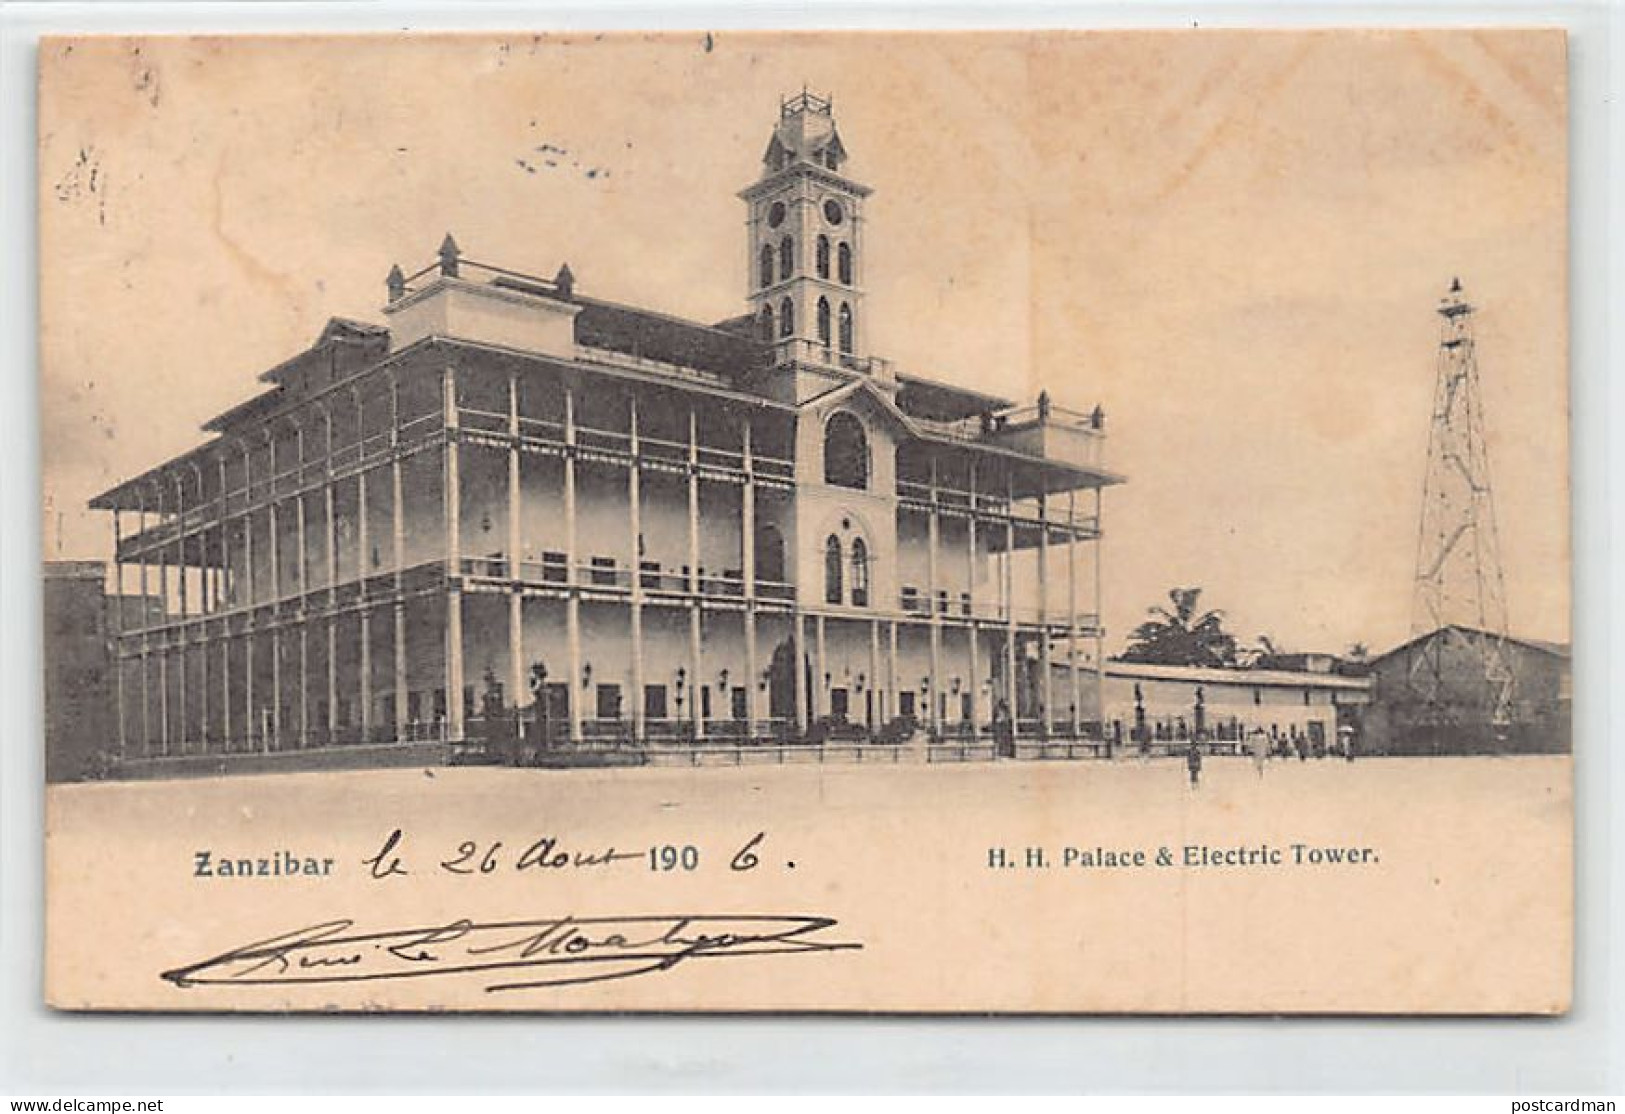 Tanzania - ZANZIBAR - H.H. Palace And Electric Tower - POSTCARD IS UNSTICKED - Publ. Pereira De Lord Brothers  - Tansania